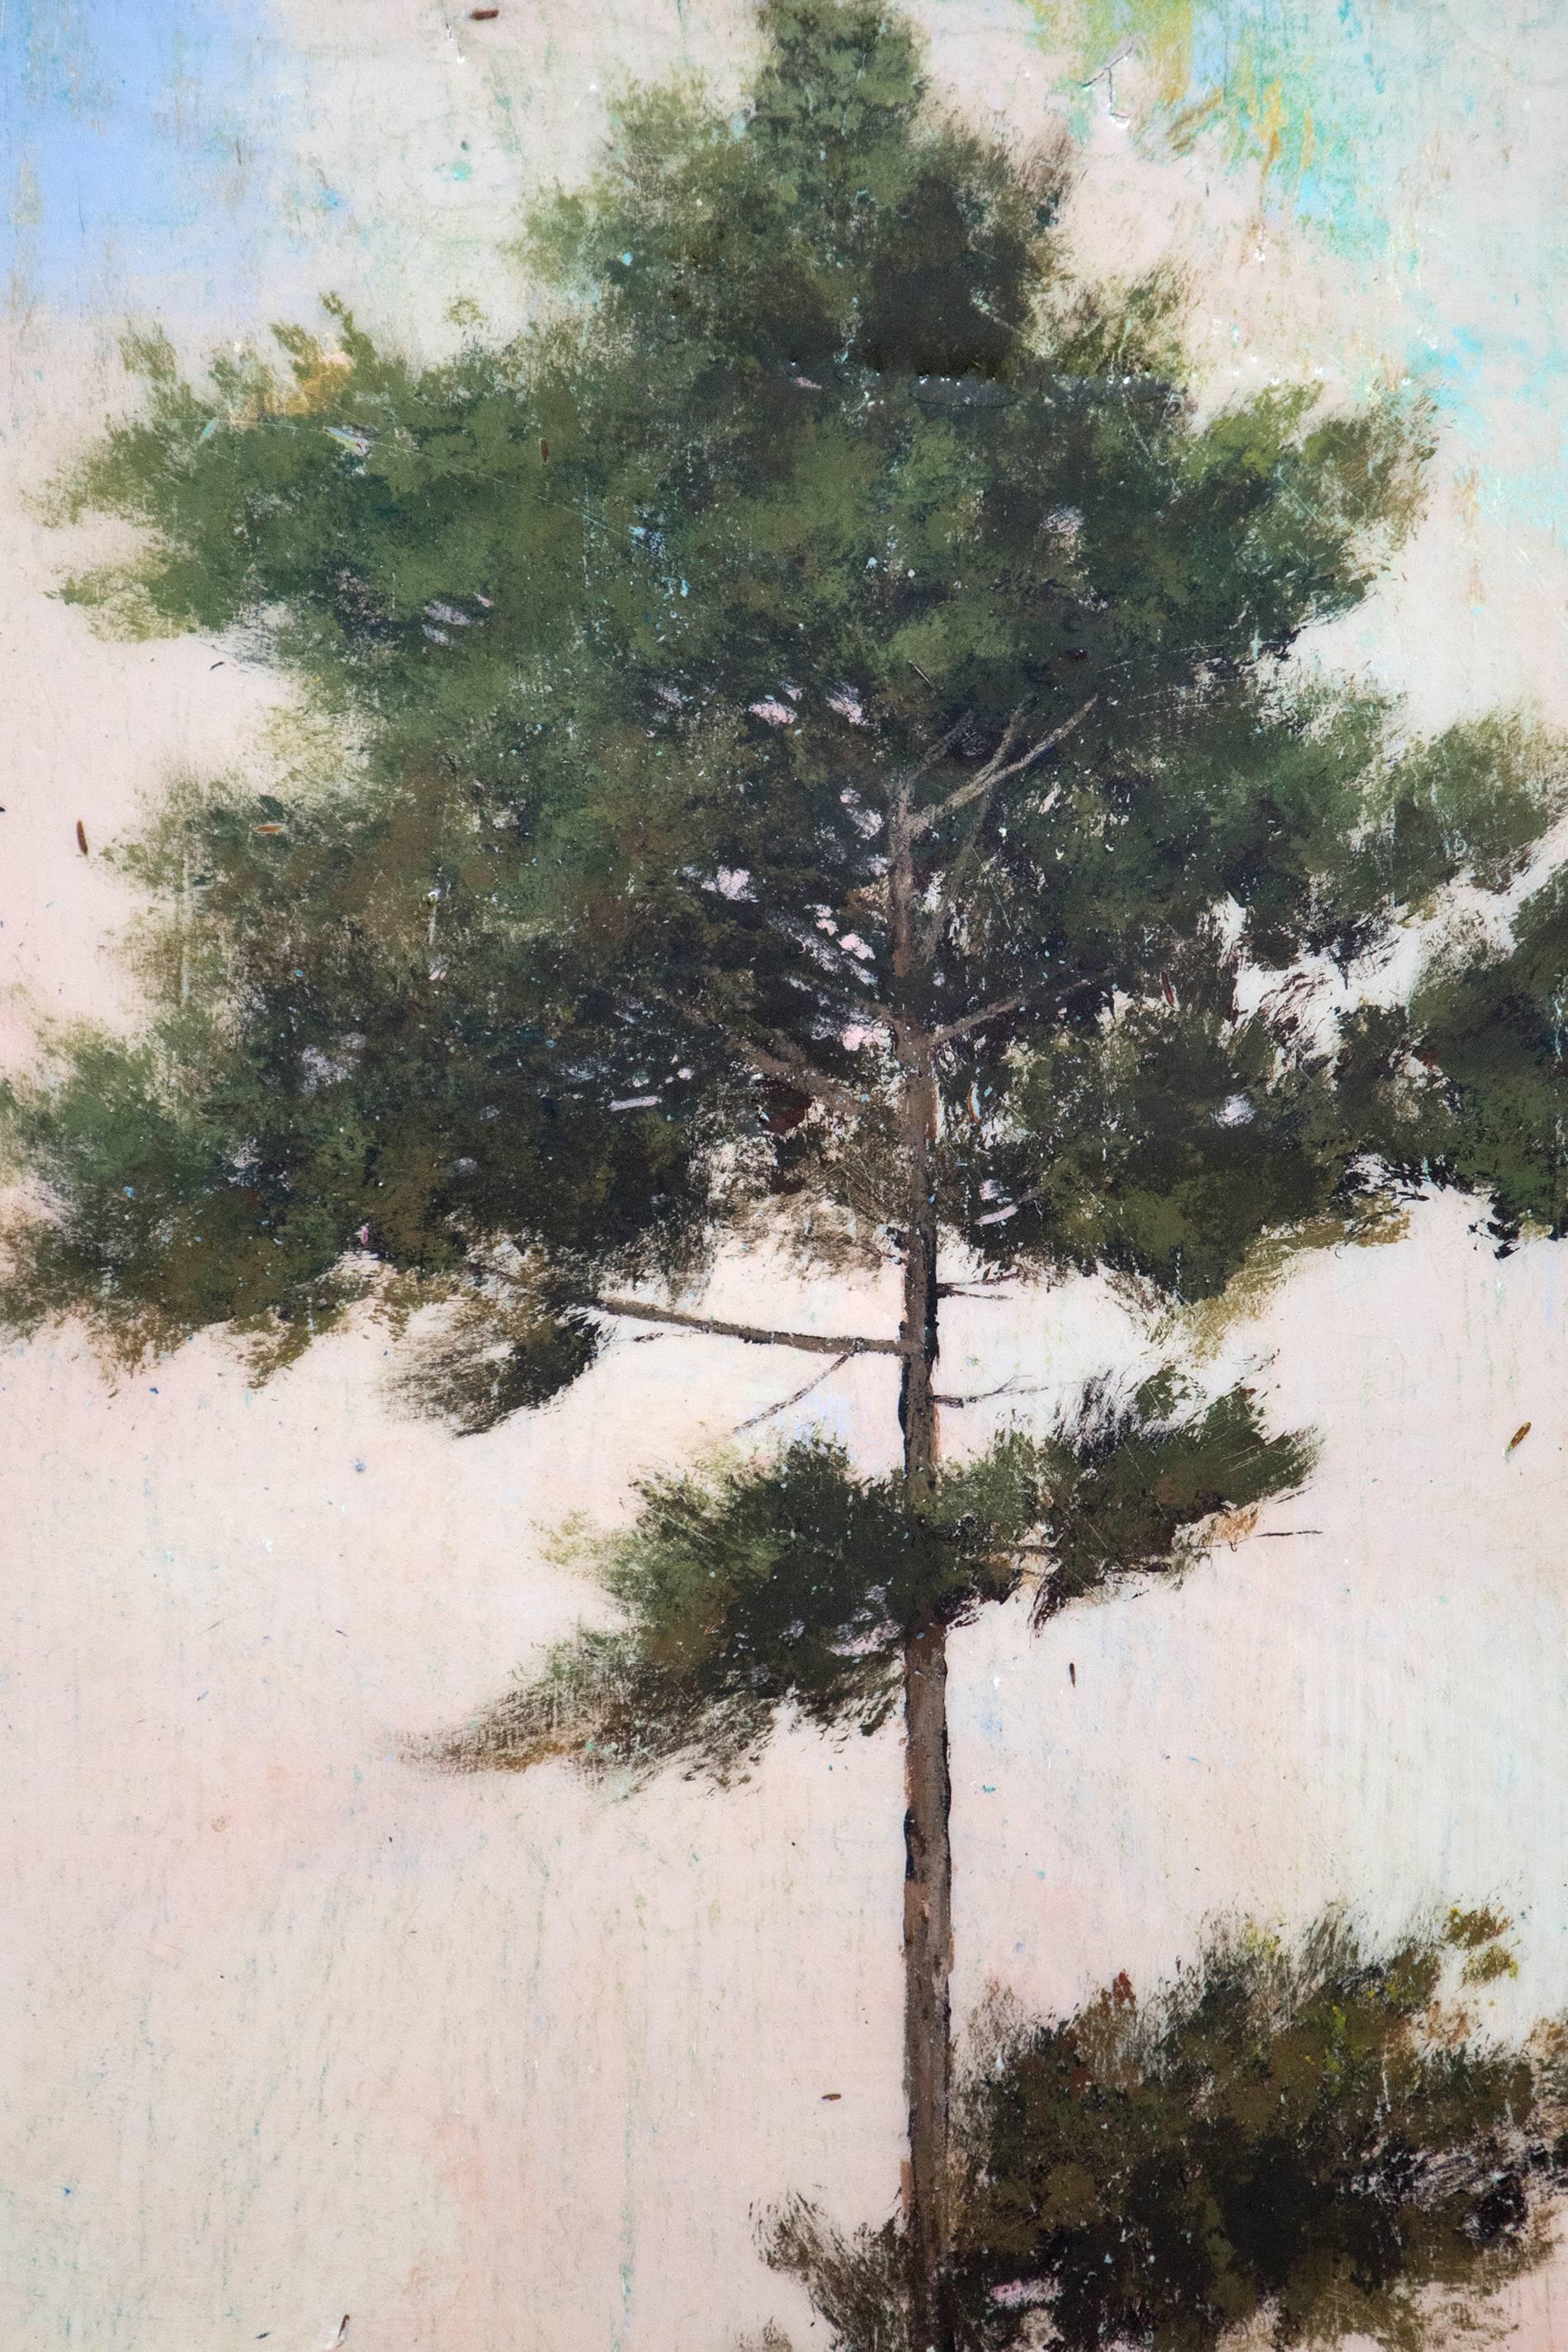 Painting of a tree, floating in a deconstructed space of pastel color and light. The surface of 'Untitled (Violet Ground)' has become part of the work, revealing the natural texture of wood grain. 

Peter Hoffer’s landscapes have one foot in classic